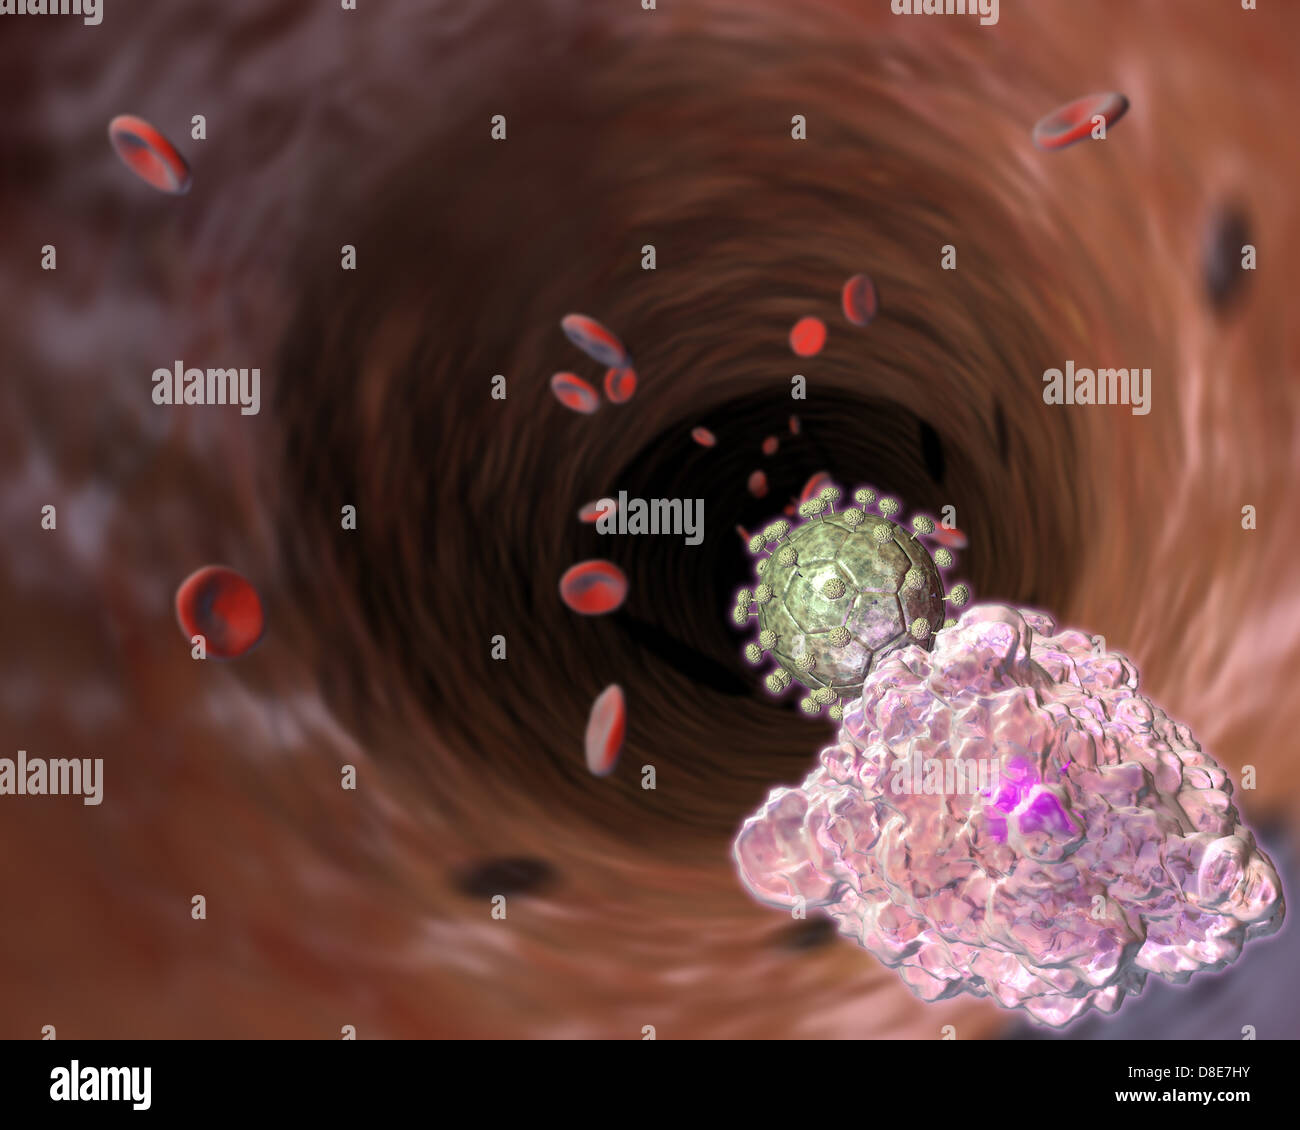 Blood cells and HI virus Stock Photo